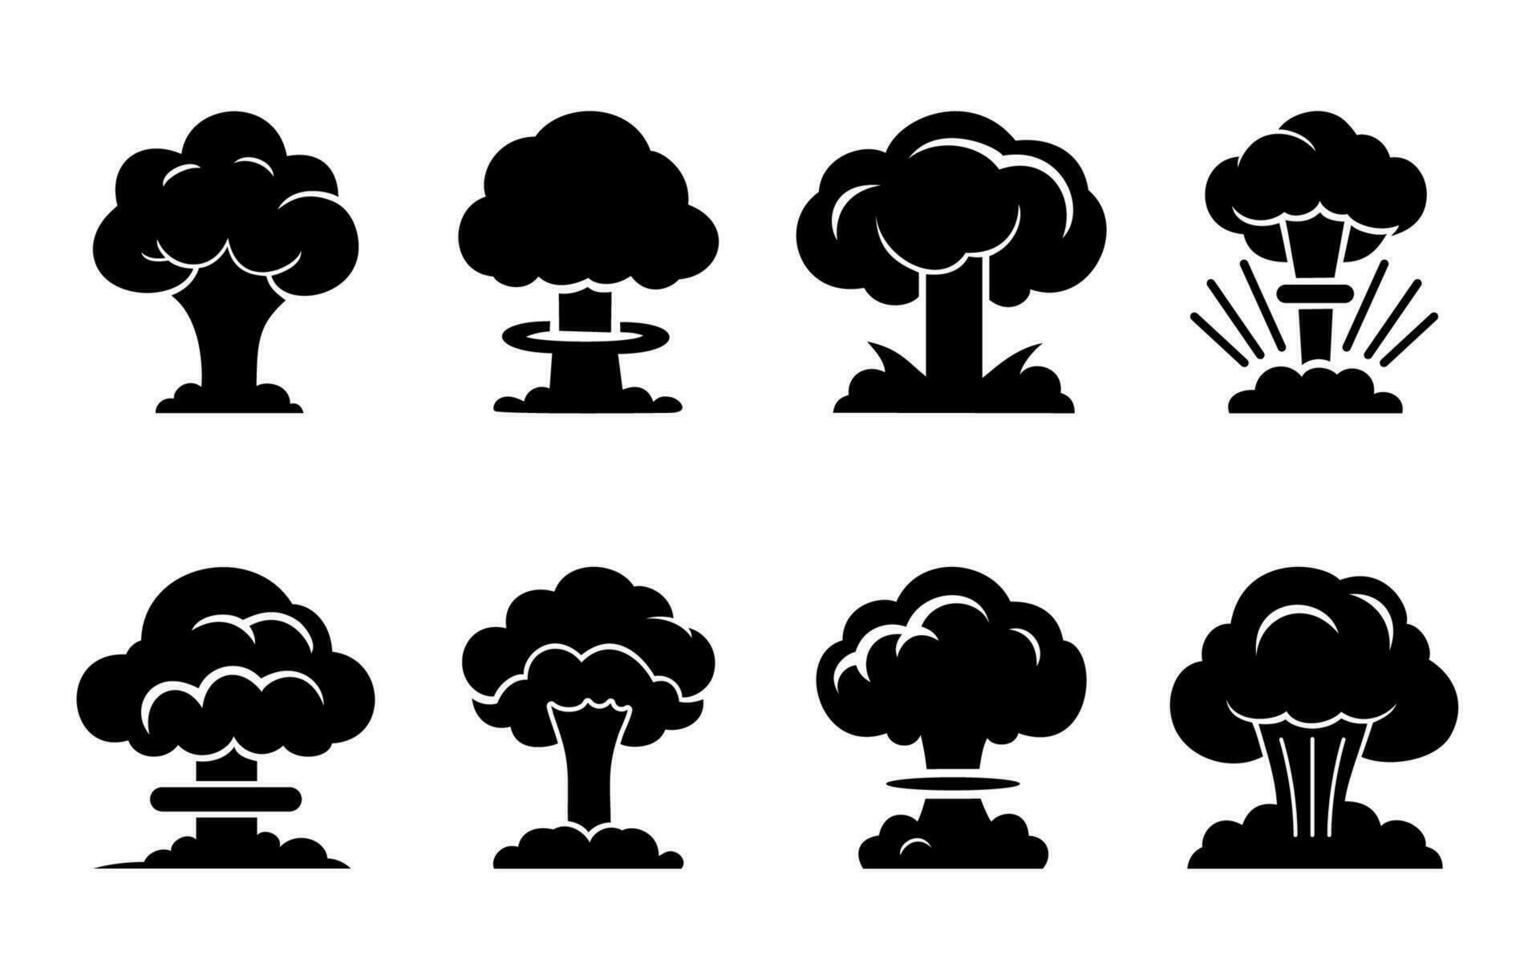 Nuclear explosion mushroom cloud set icon. Atomic bomb war, symbol end of the world isolated on white background. Vector illustration